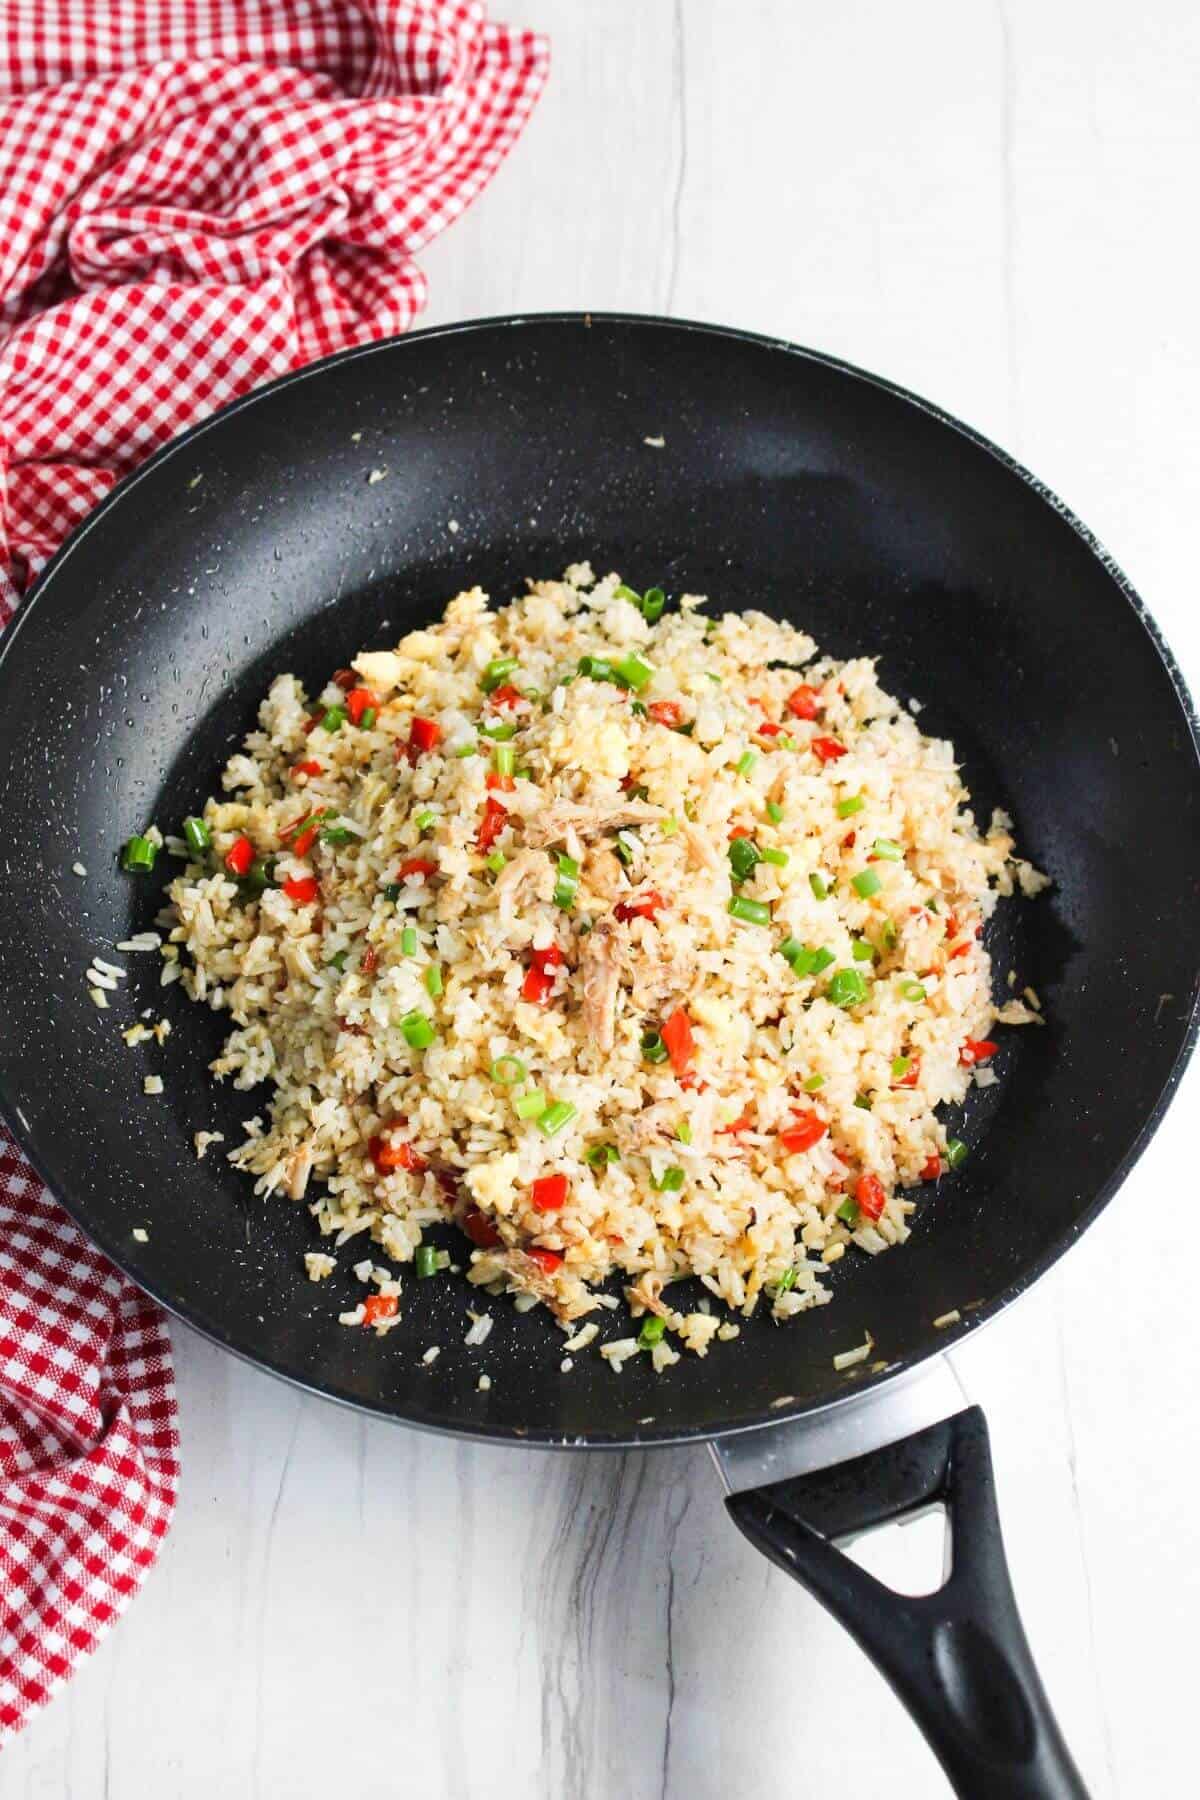 Fried rice in a frying pan on a wooden table.